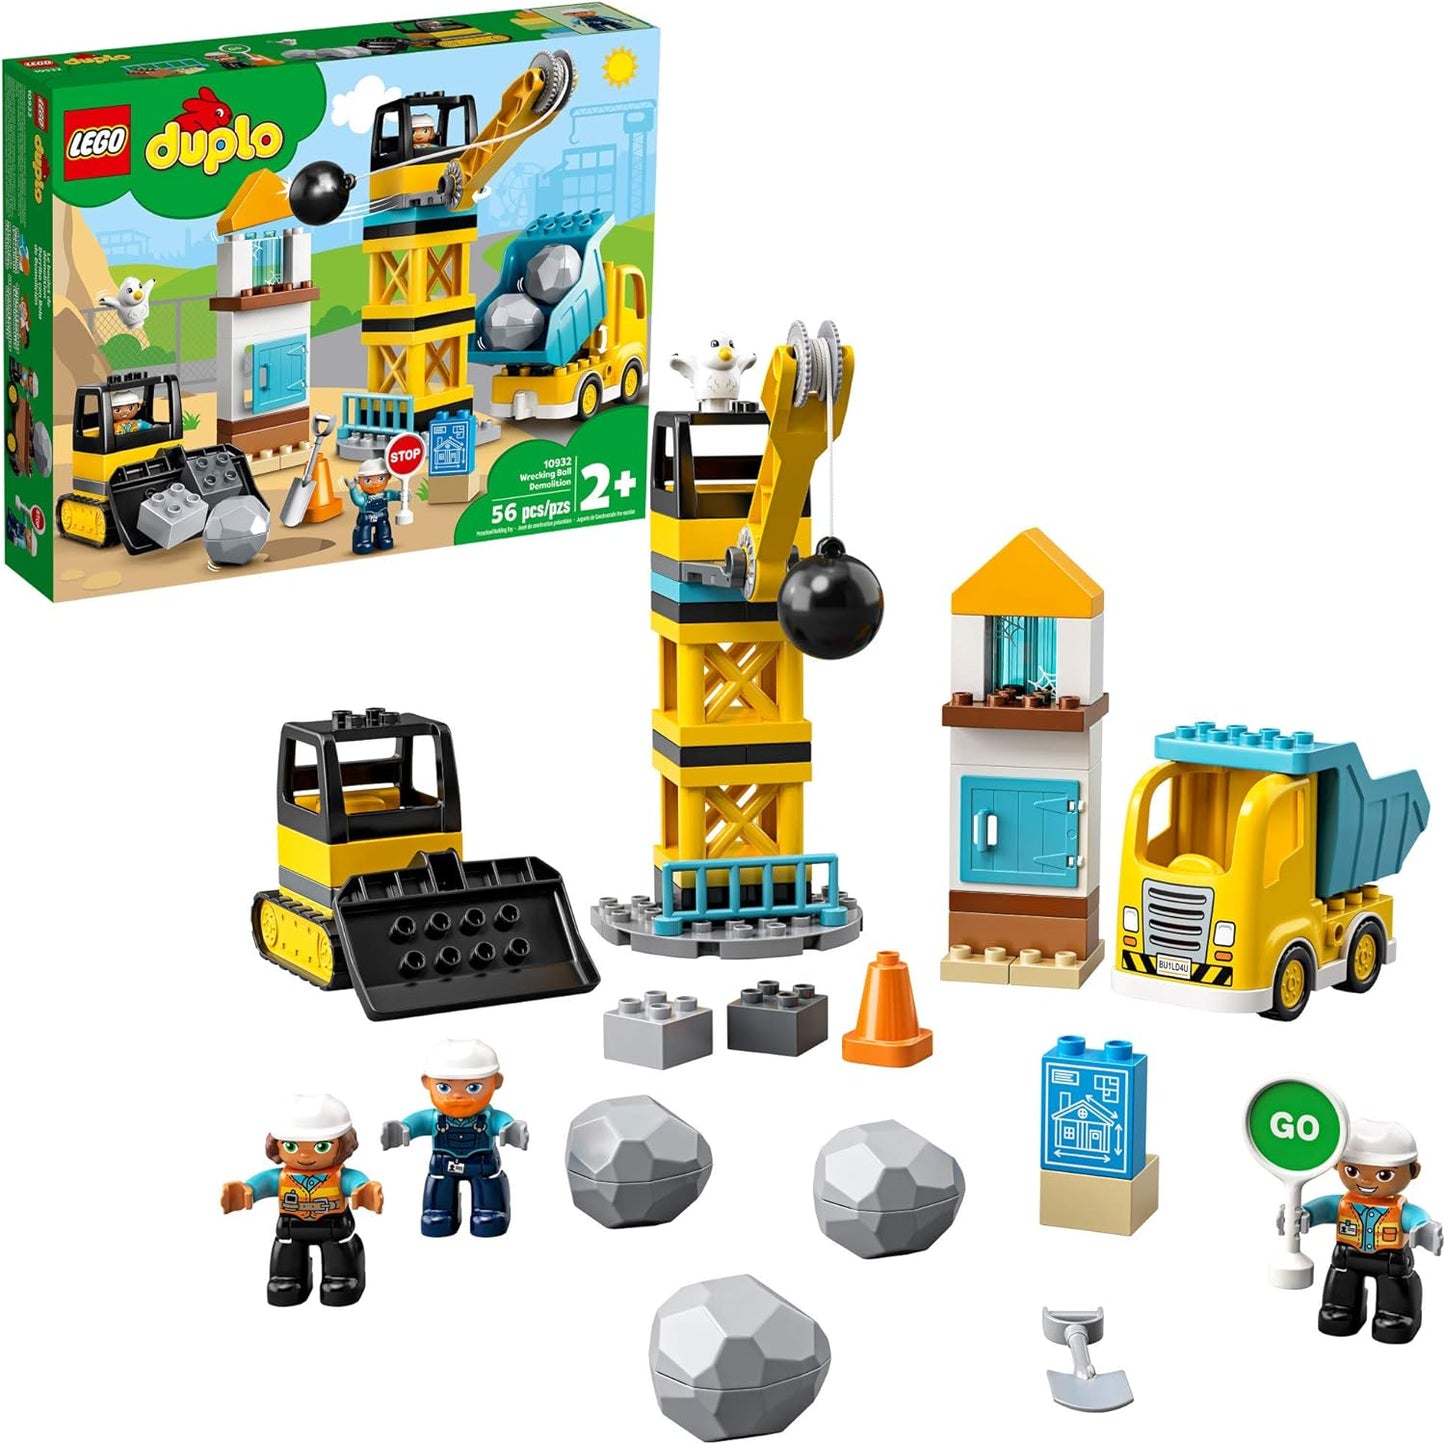 LEGO DUPLO Construction Wrecking Ball Demolition 10932 Toy for Preschool Kids; Building and Imaginative Play with Construction Vehicles; Great Developmental Gift for Toddlers (56 Pieces)